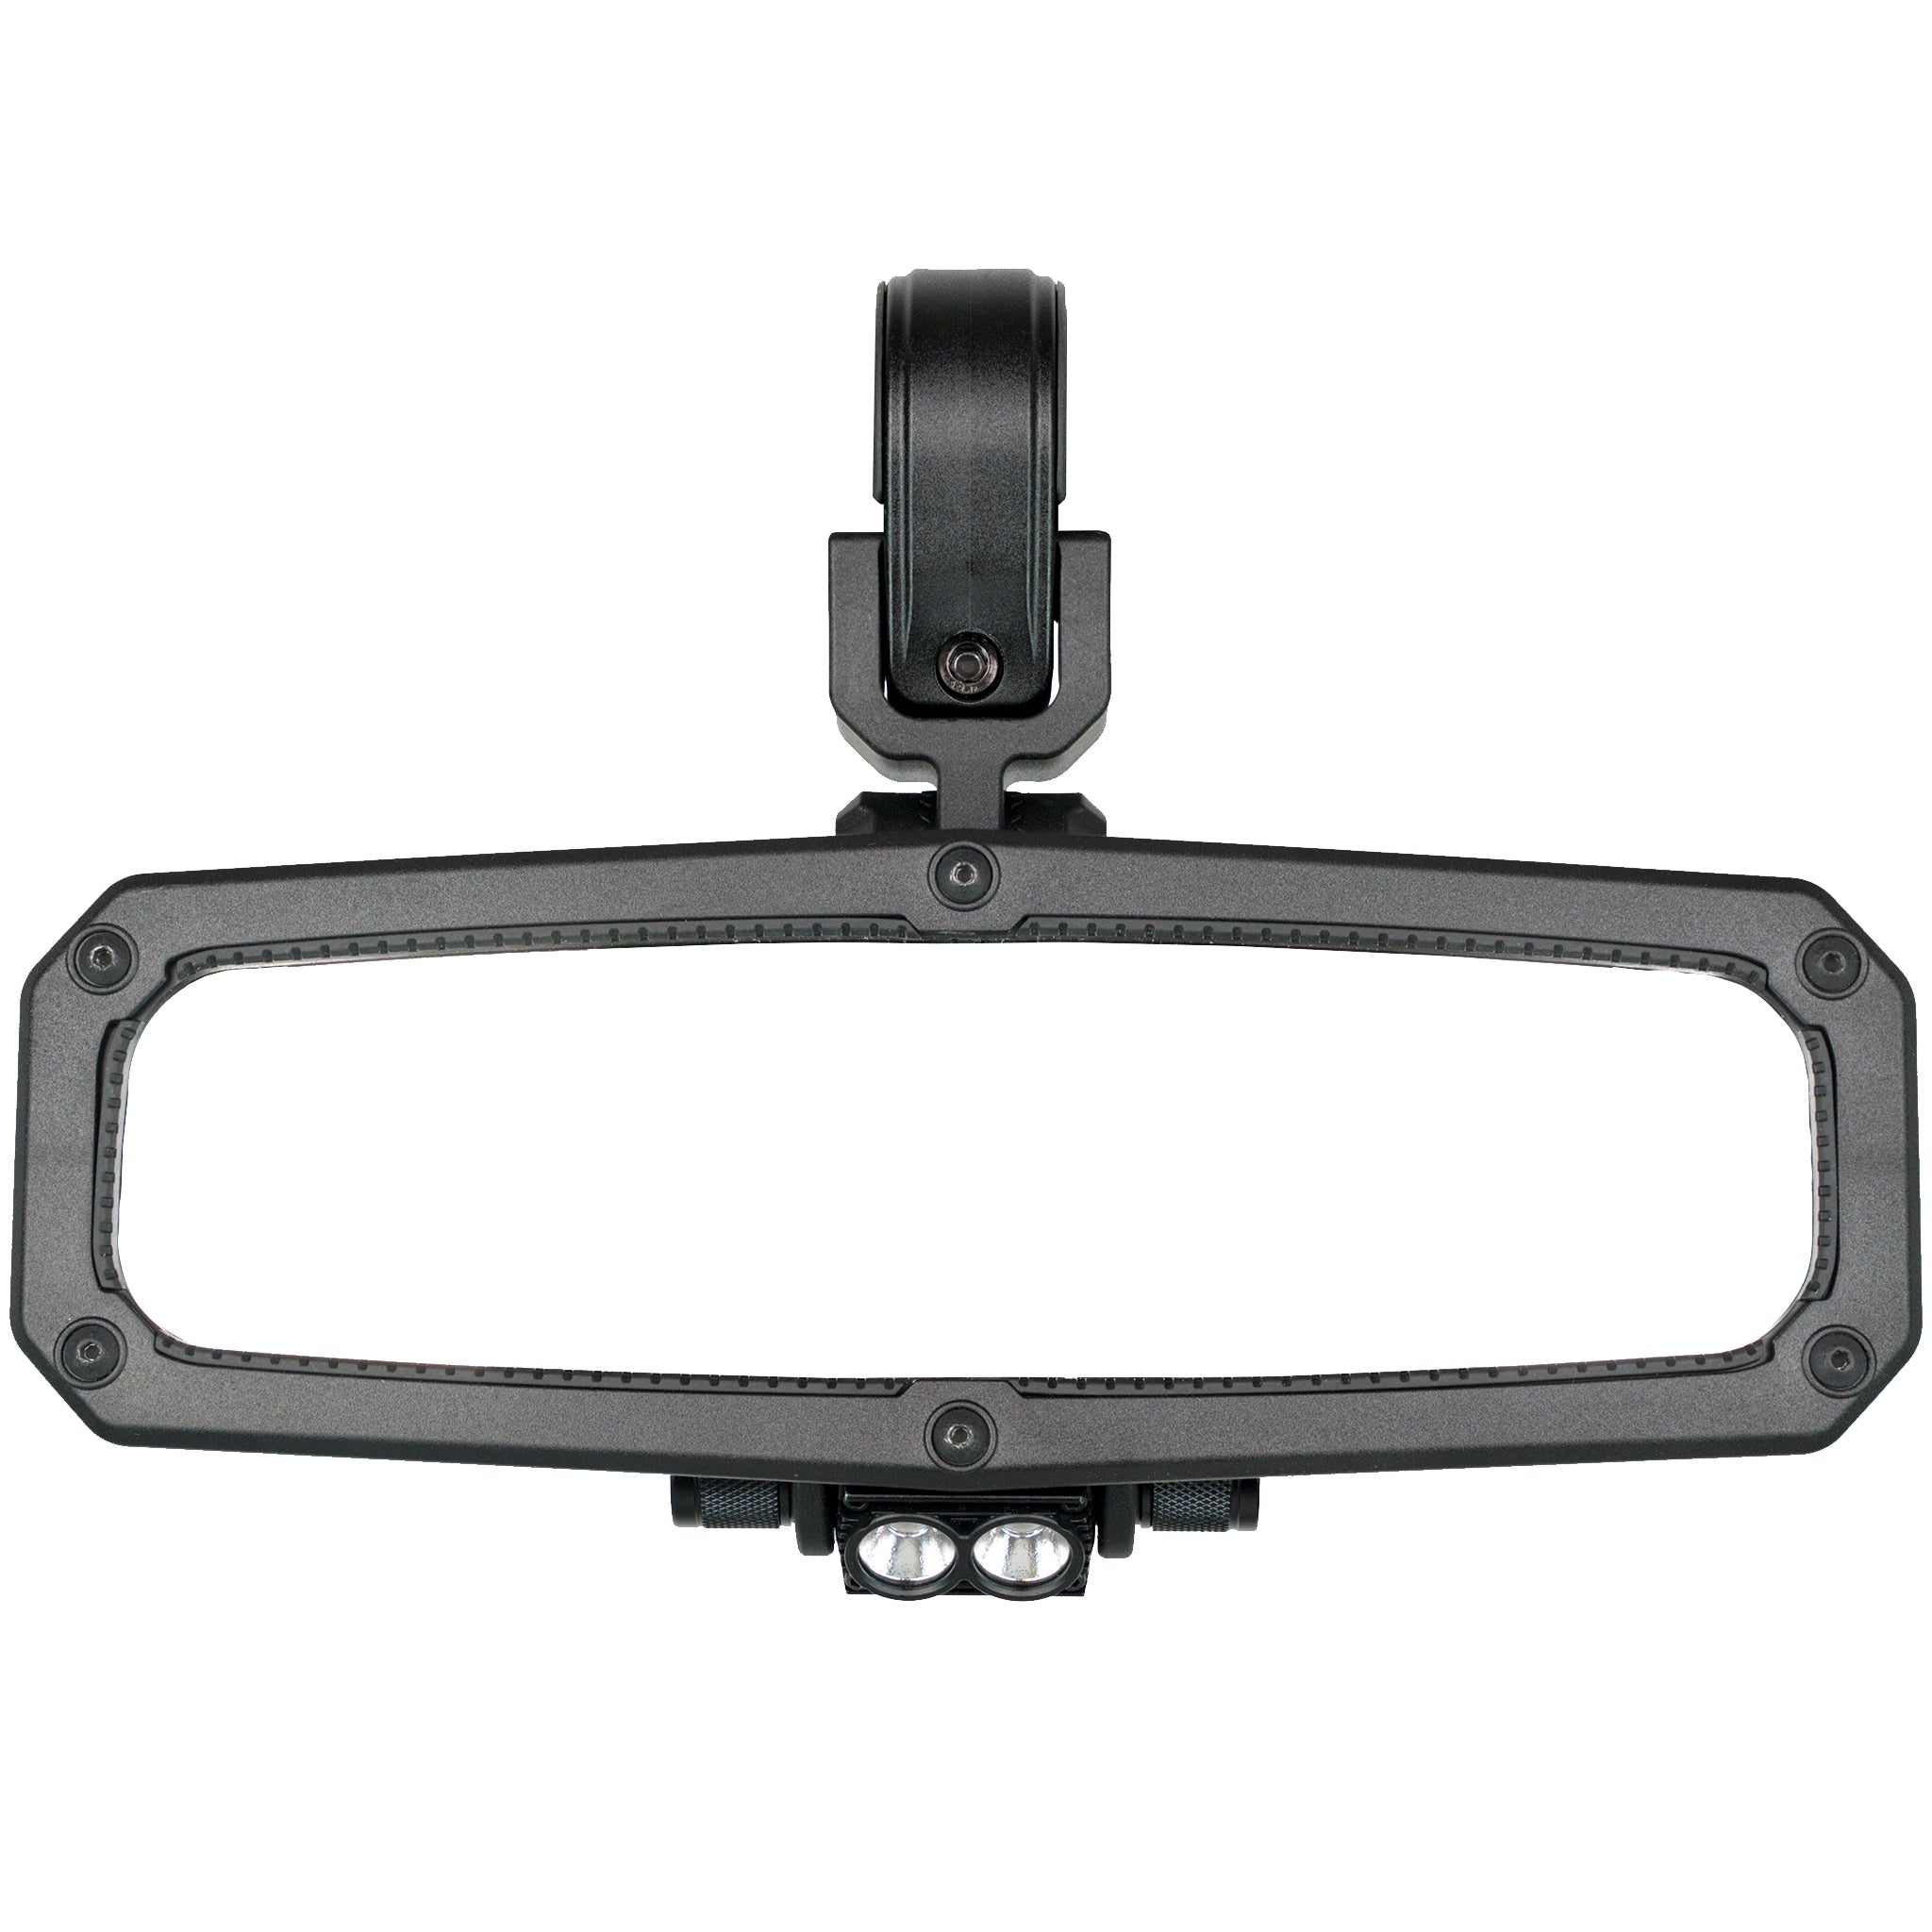 CLEARVIEW™ UTV REARVIEW LED DOME LIGHT - ROUND TUBE MOUNT